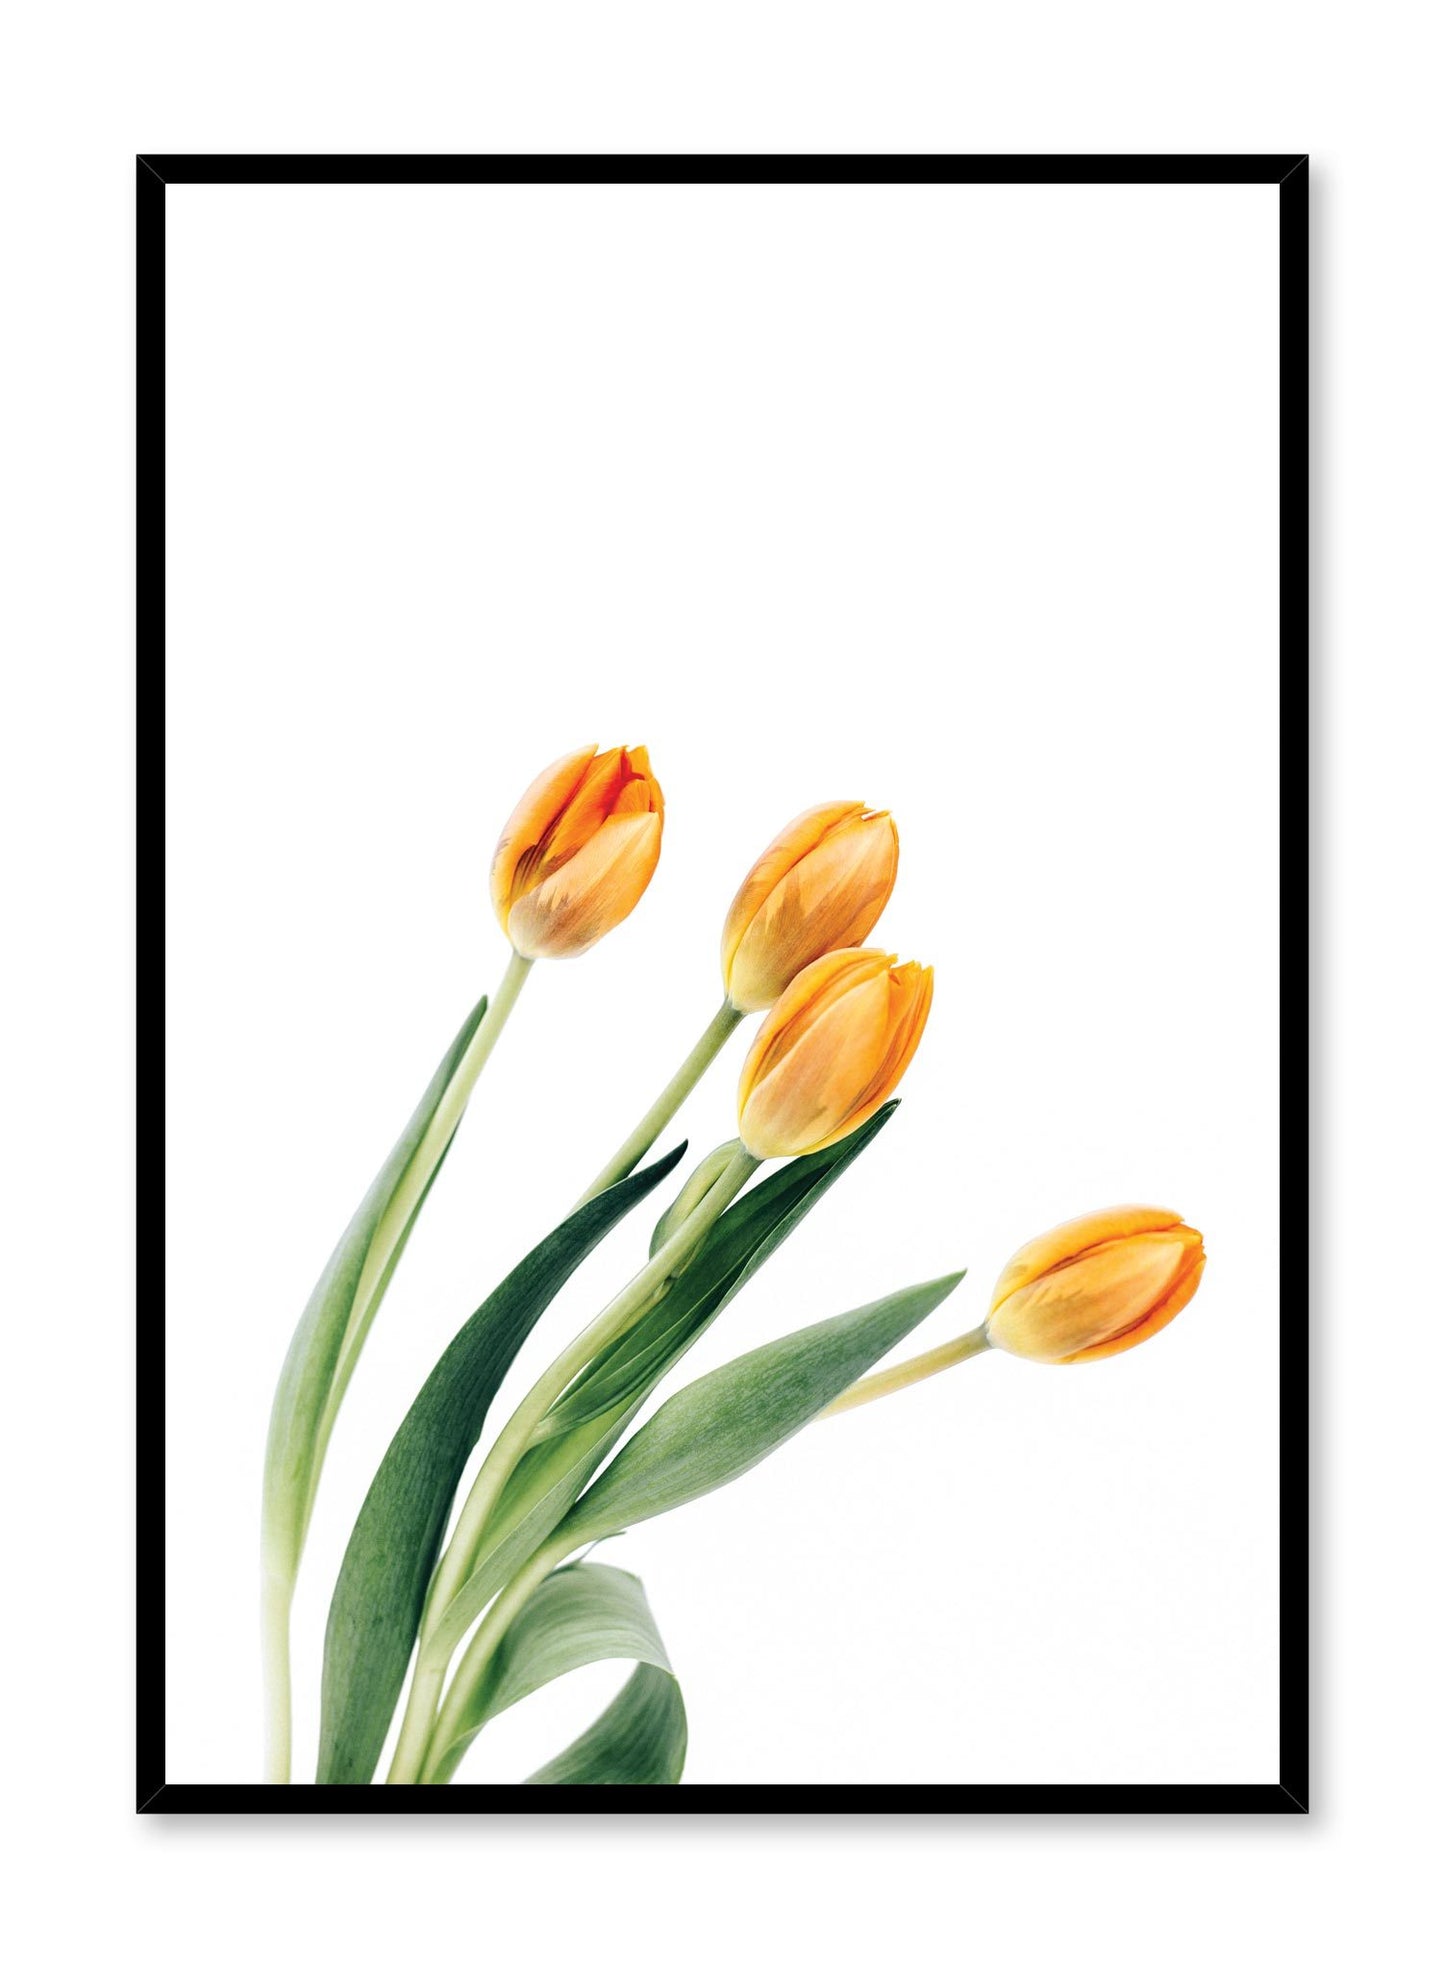 Minimalist wall poster by Opposite Wall with orange tulips bouquet floral photography